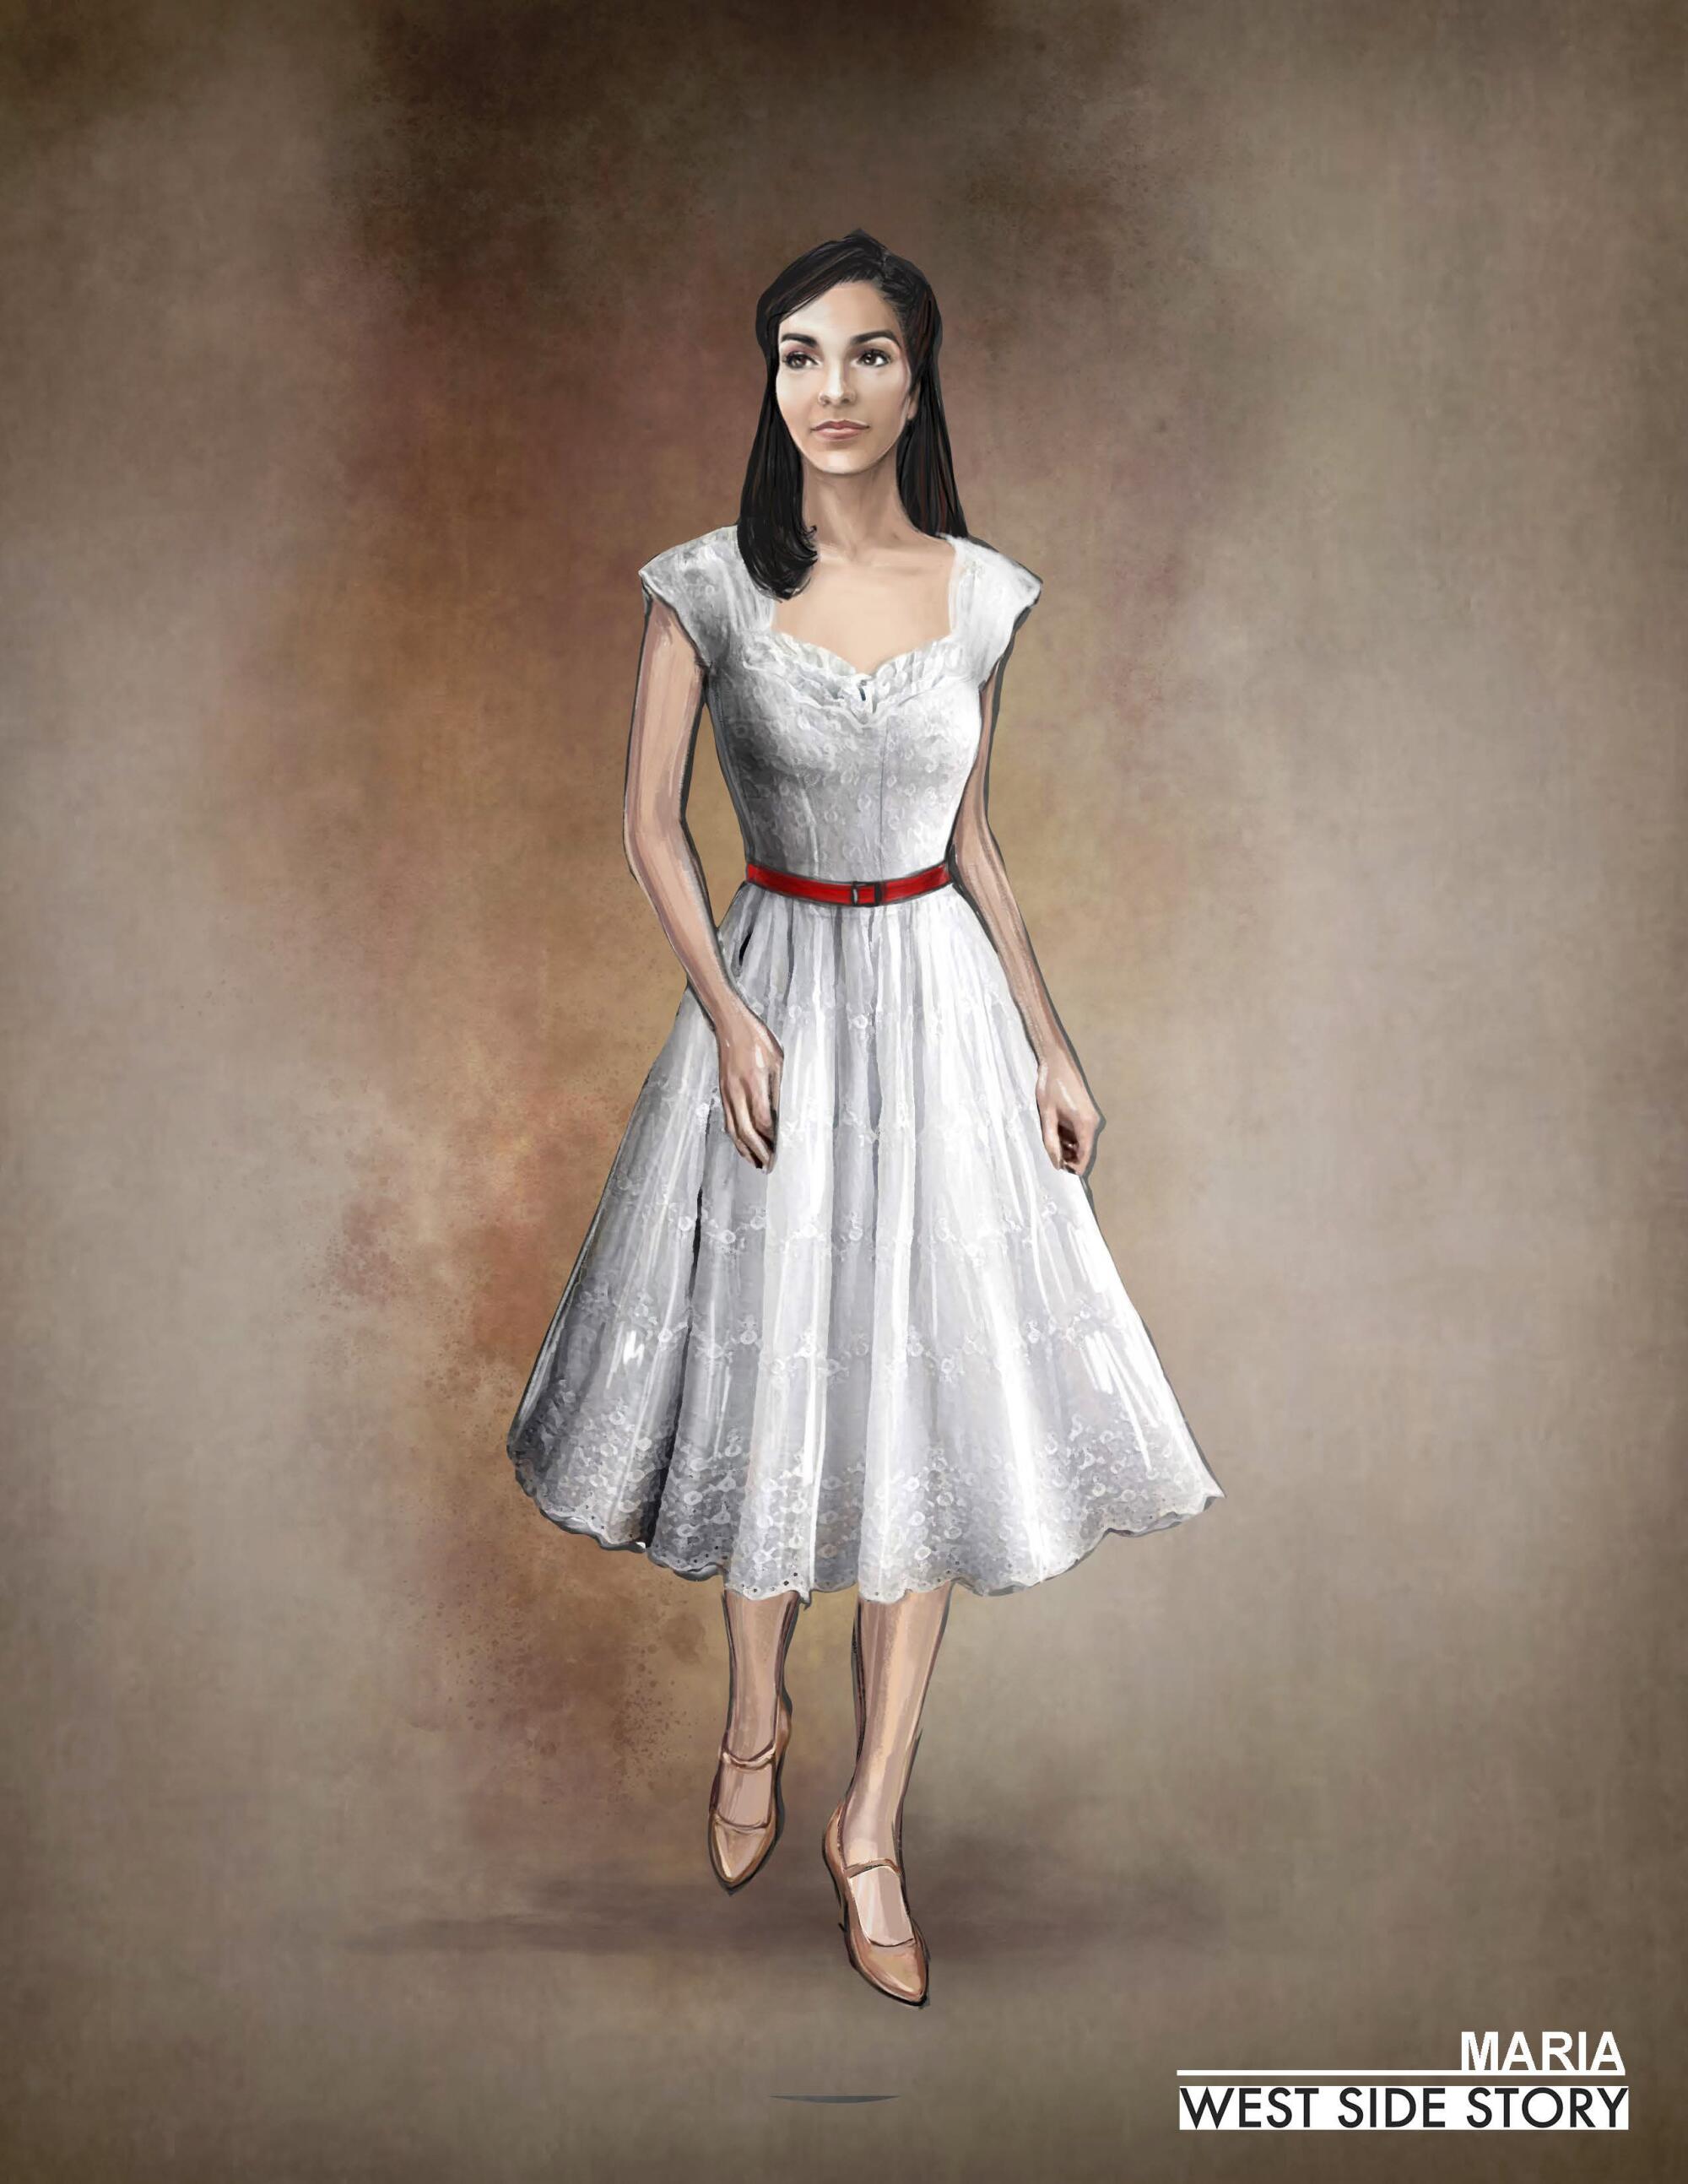 Sketch for Maria's simple white dress costume with a red belt for West Side Story 